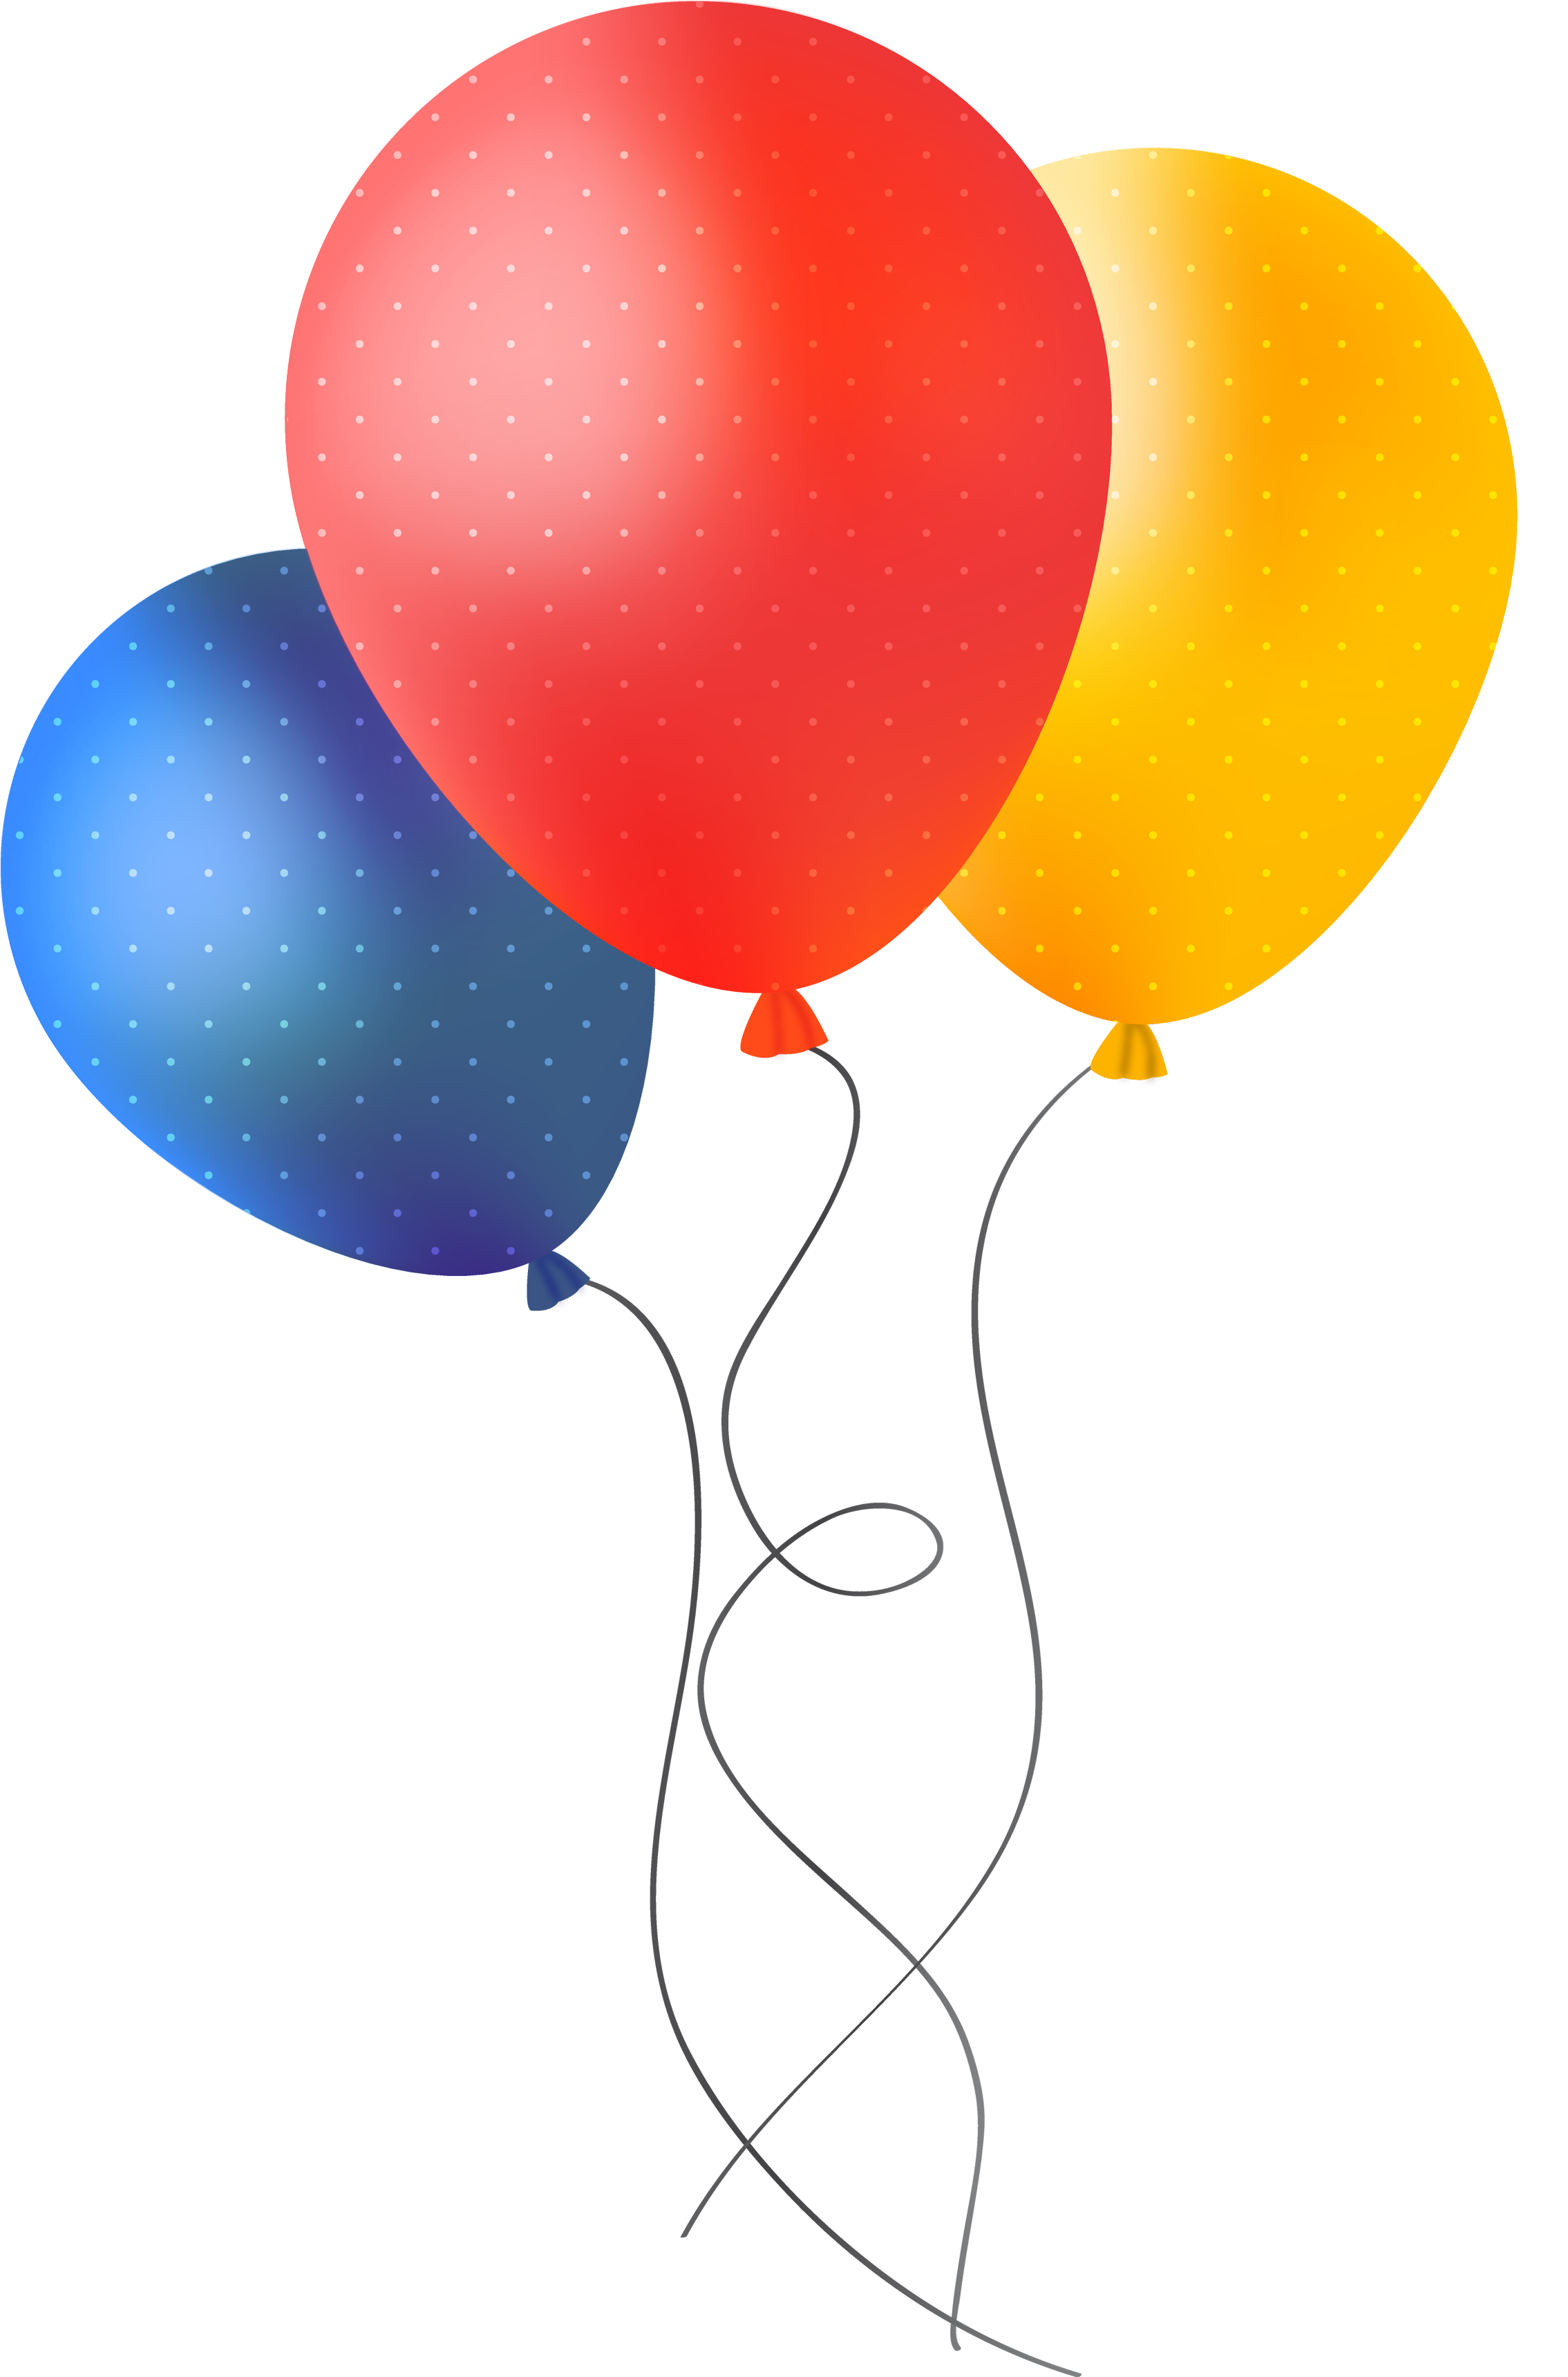 Balloons PNG Image Background